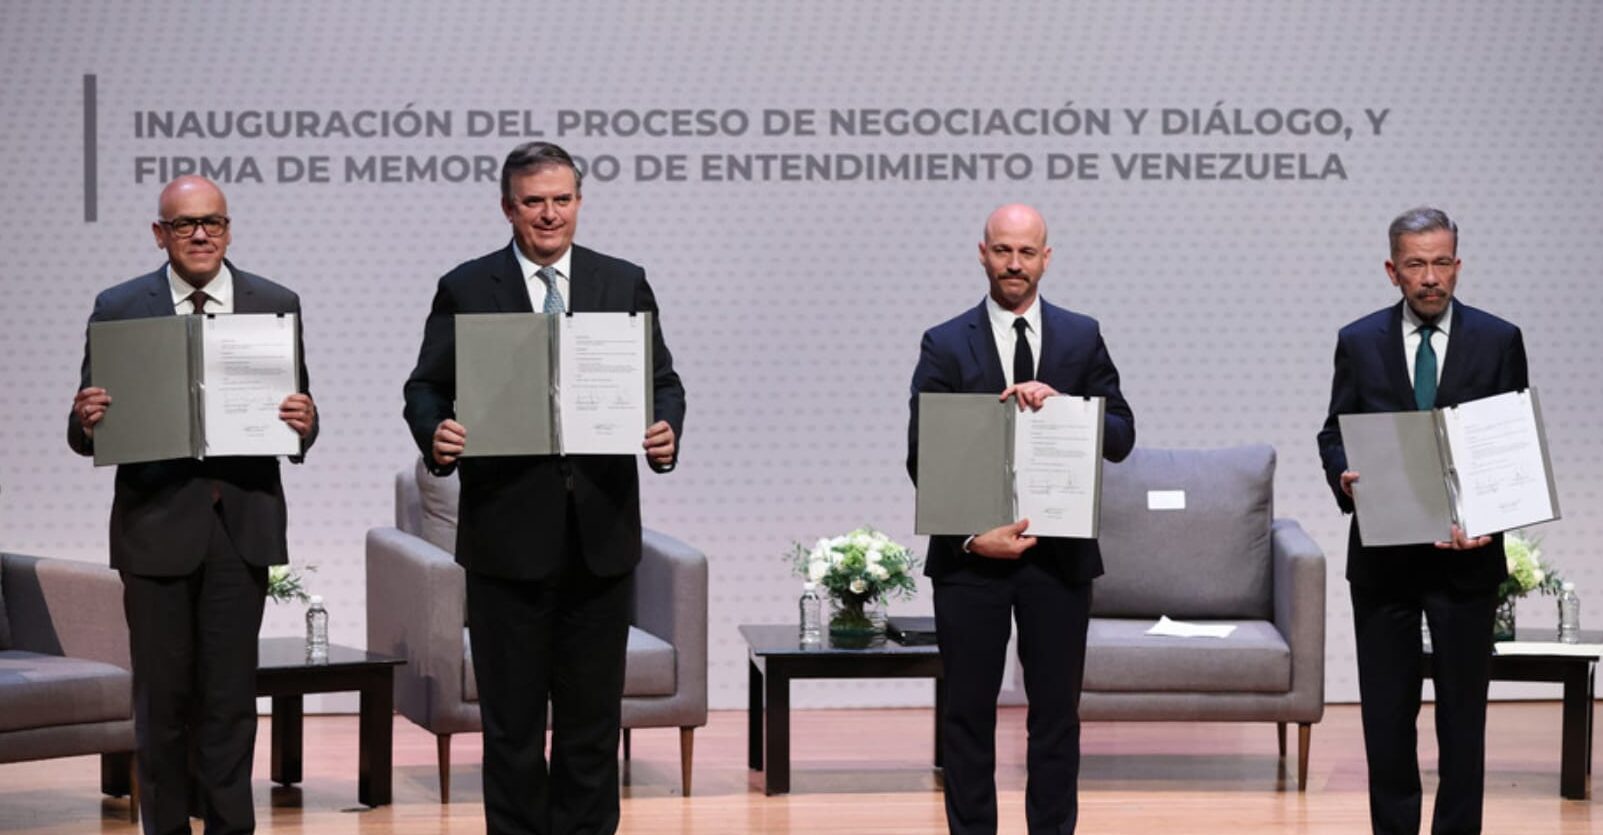 Representatives of the government and the far-right opposition of Venezuela during the launch of the Mexico Talks, August 13, 2021. Photo: Hector Vivas/Gettyimages.ru.